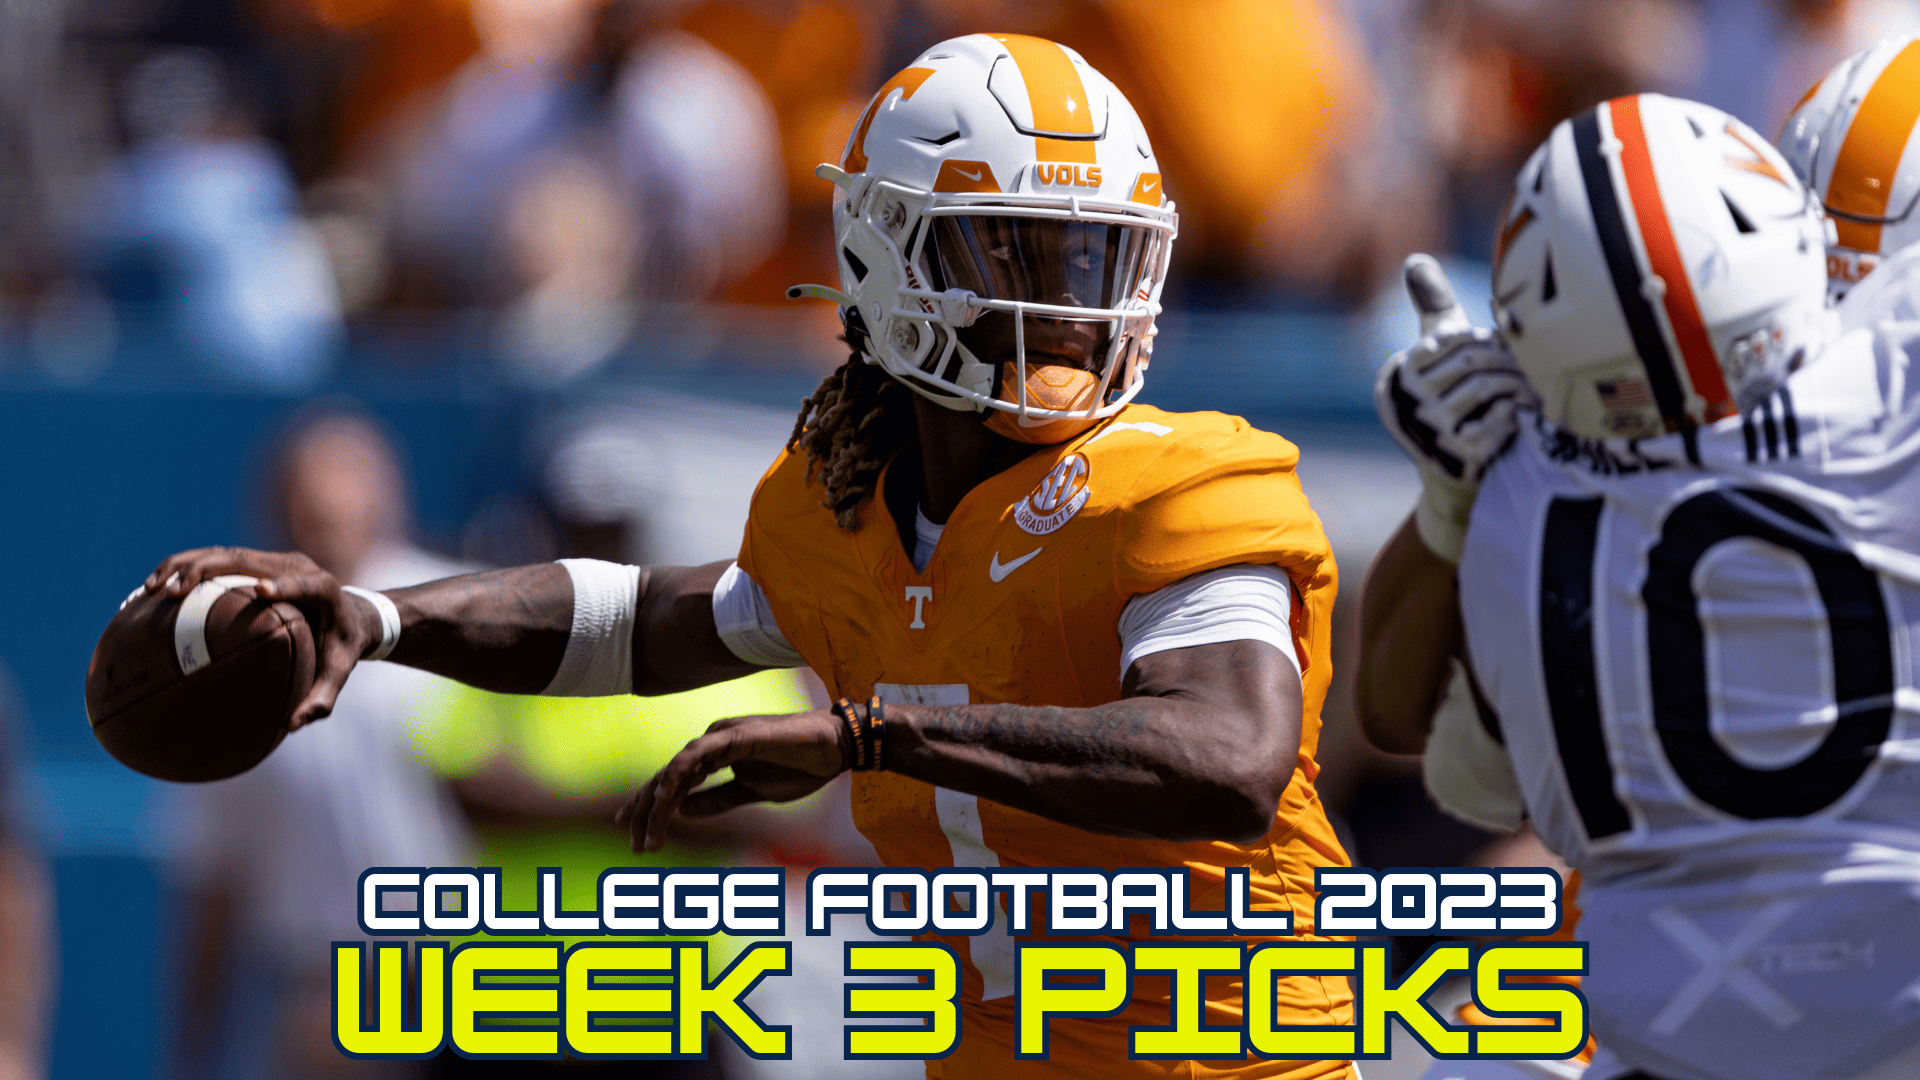 College Football Week 3 Predictions: Picks for Virginia-Maryland,  Tennessee-Florida and More